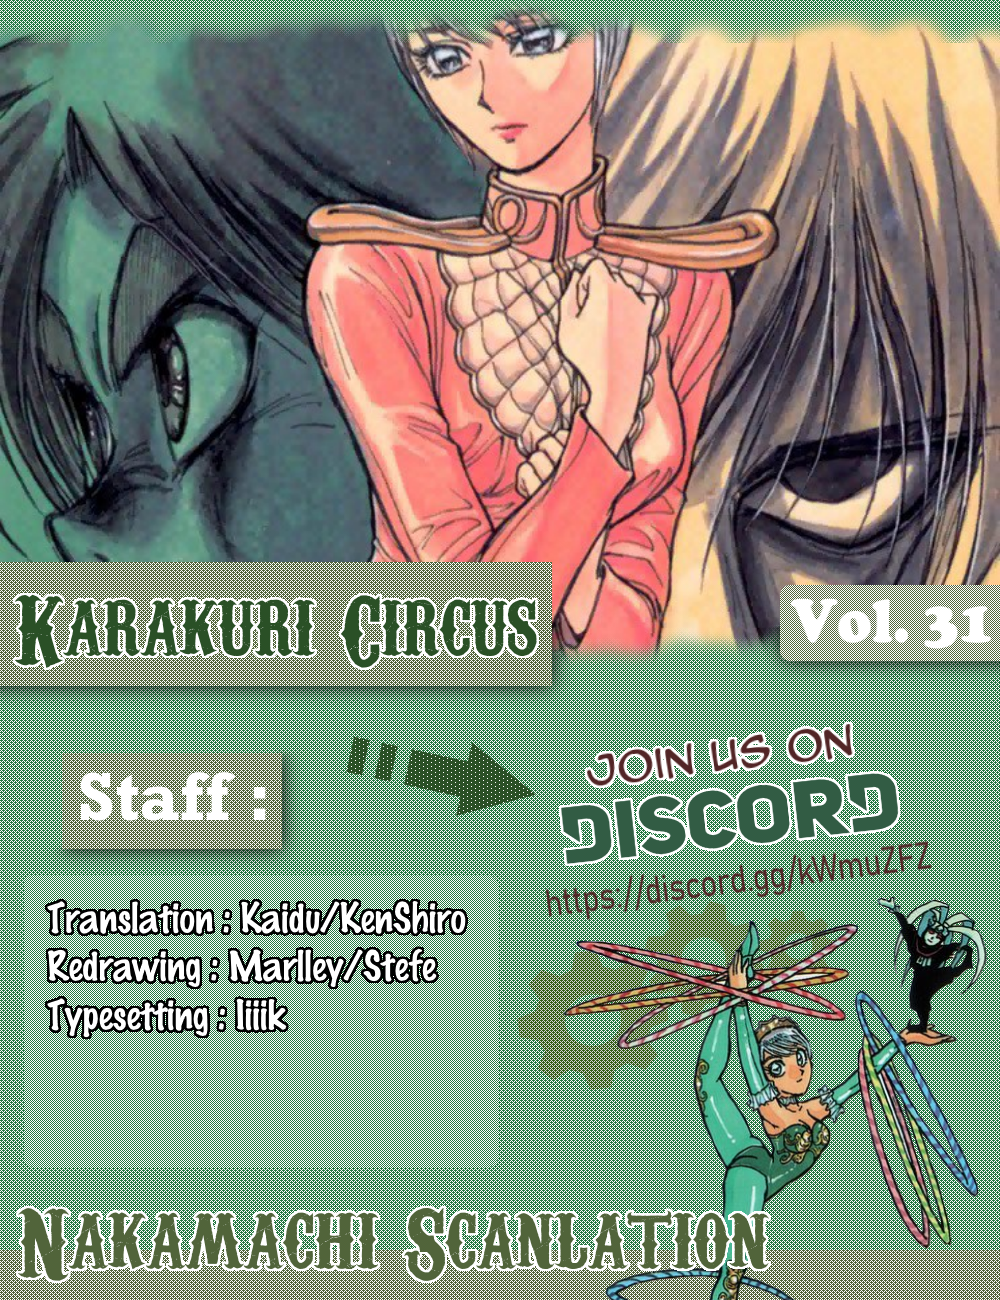 Karakuri Circus Chapter 297: Main Part - Welcome To The Kuroga Village - Act 15: Bubble The Scarlet - Picture 2